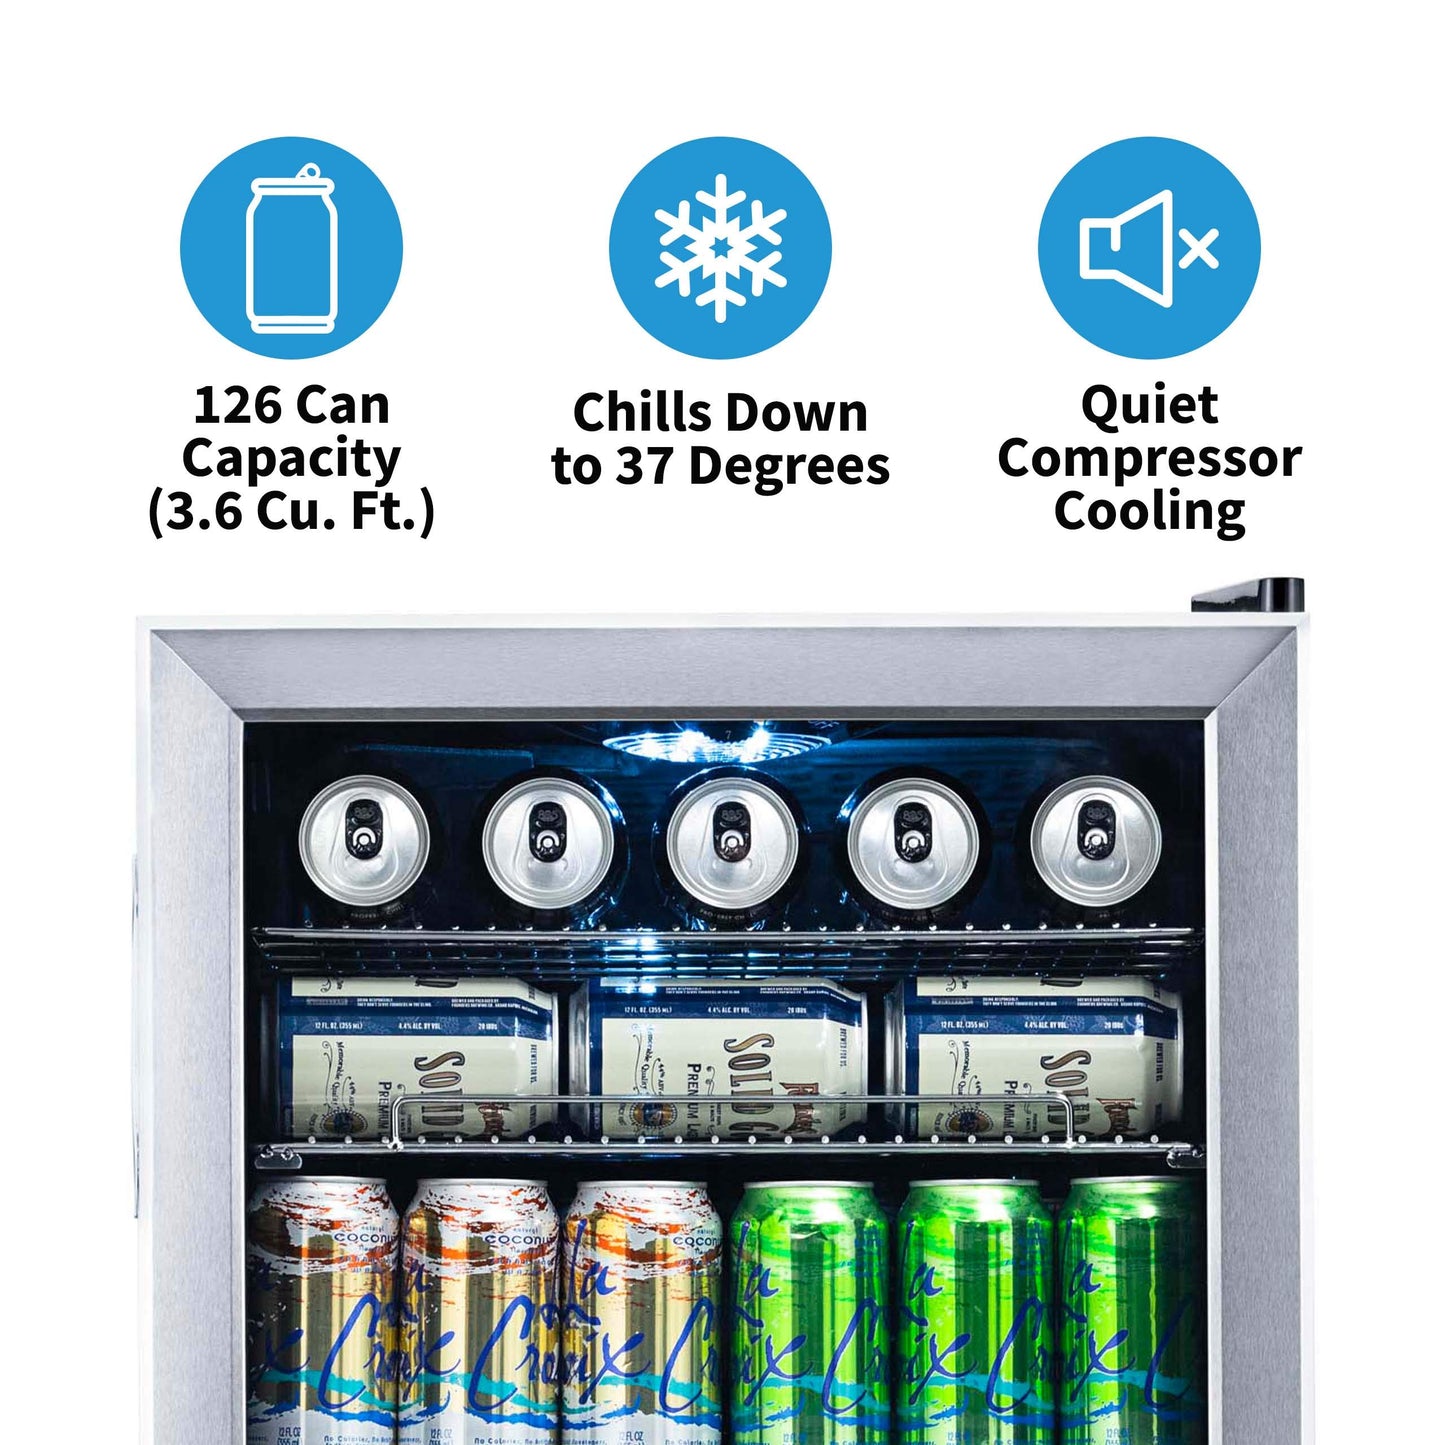 NewAir Beverage Refrigerator And Cooler, Free Standing Glass Door Refrigerator Holds Up To 126 Cans, Cools Down To 37 Degrees Perfect Organizer For Beer, Wine, Soda, Pop, And Cooler Drinks